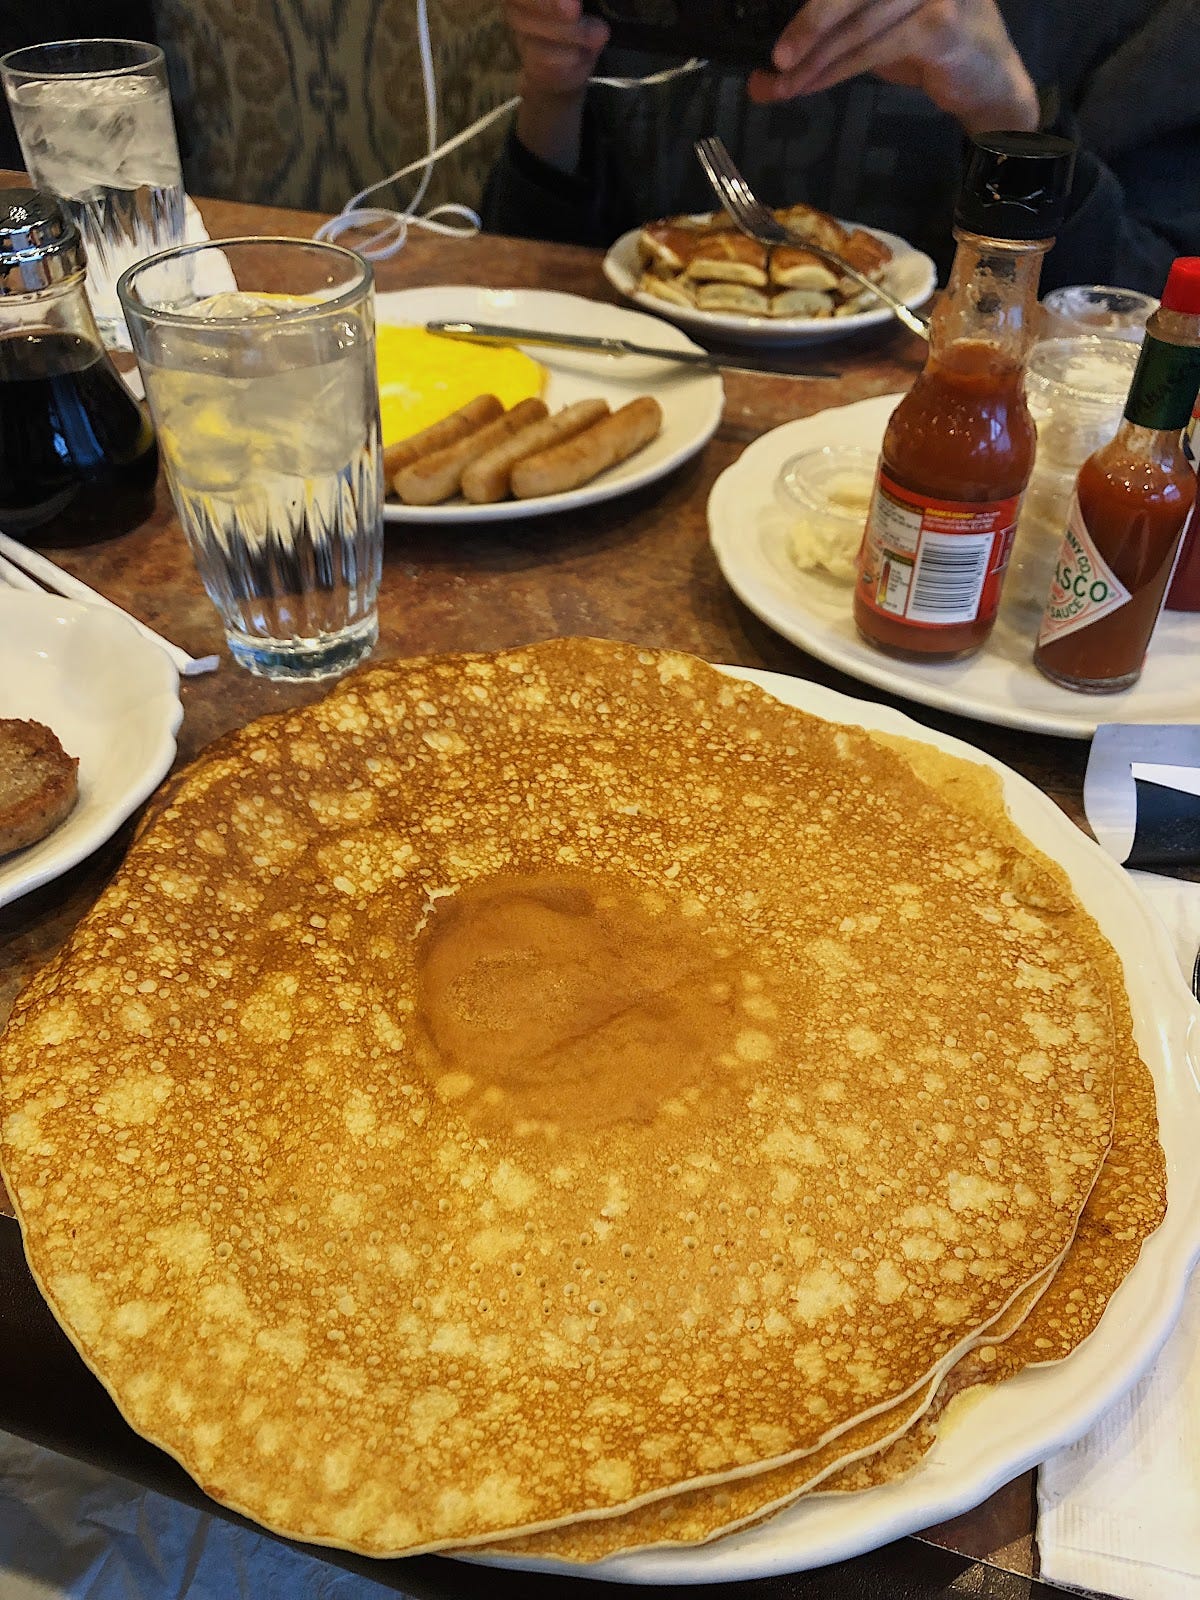 A stack of giant 49er pancakes and sausage links in the distance and sides of butter and tabasco sauce on plates at a breakfast restaurant